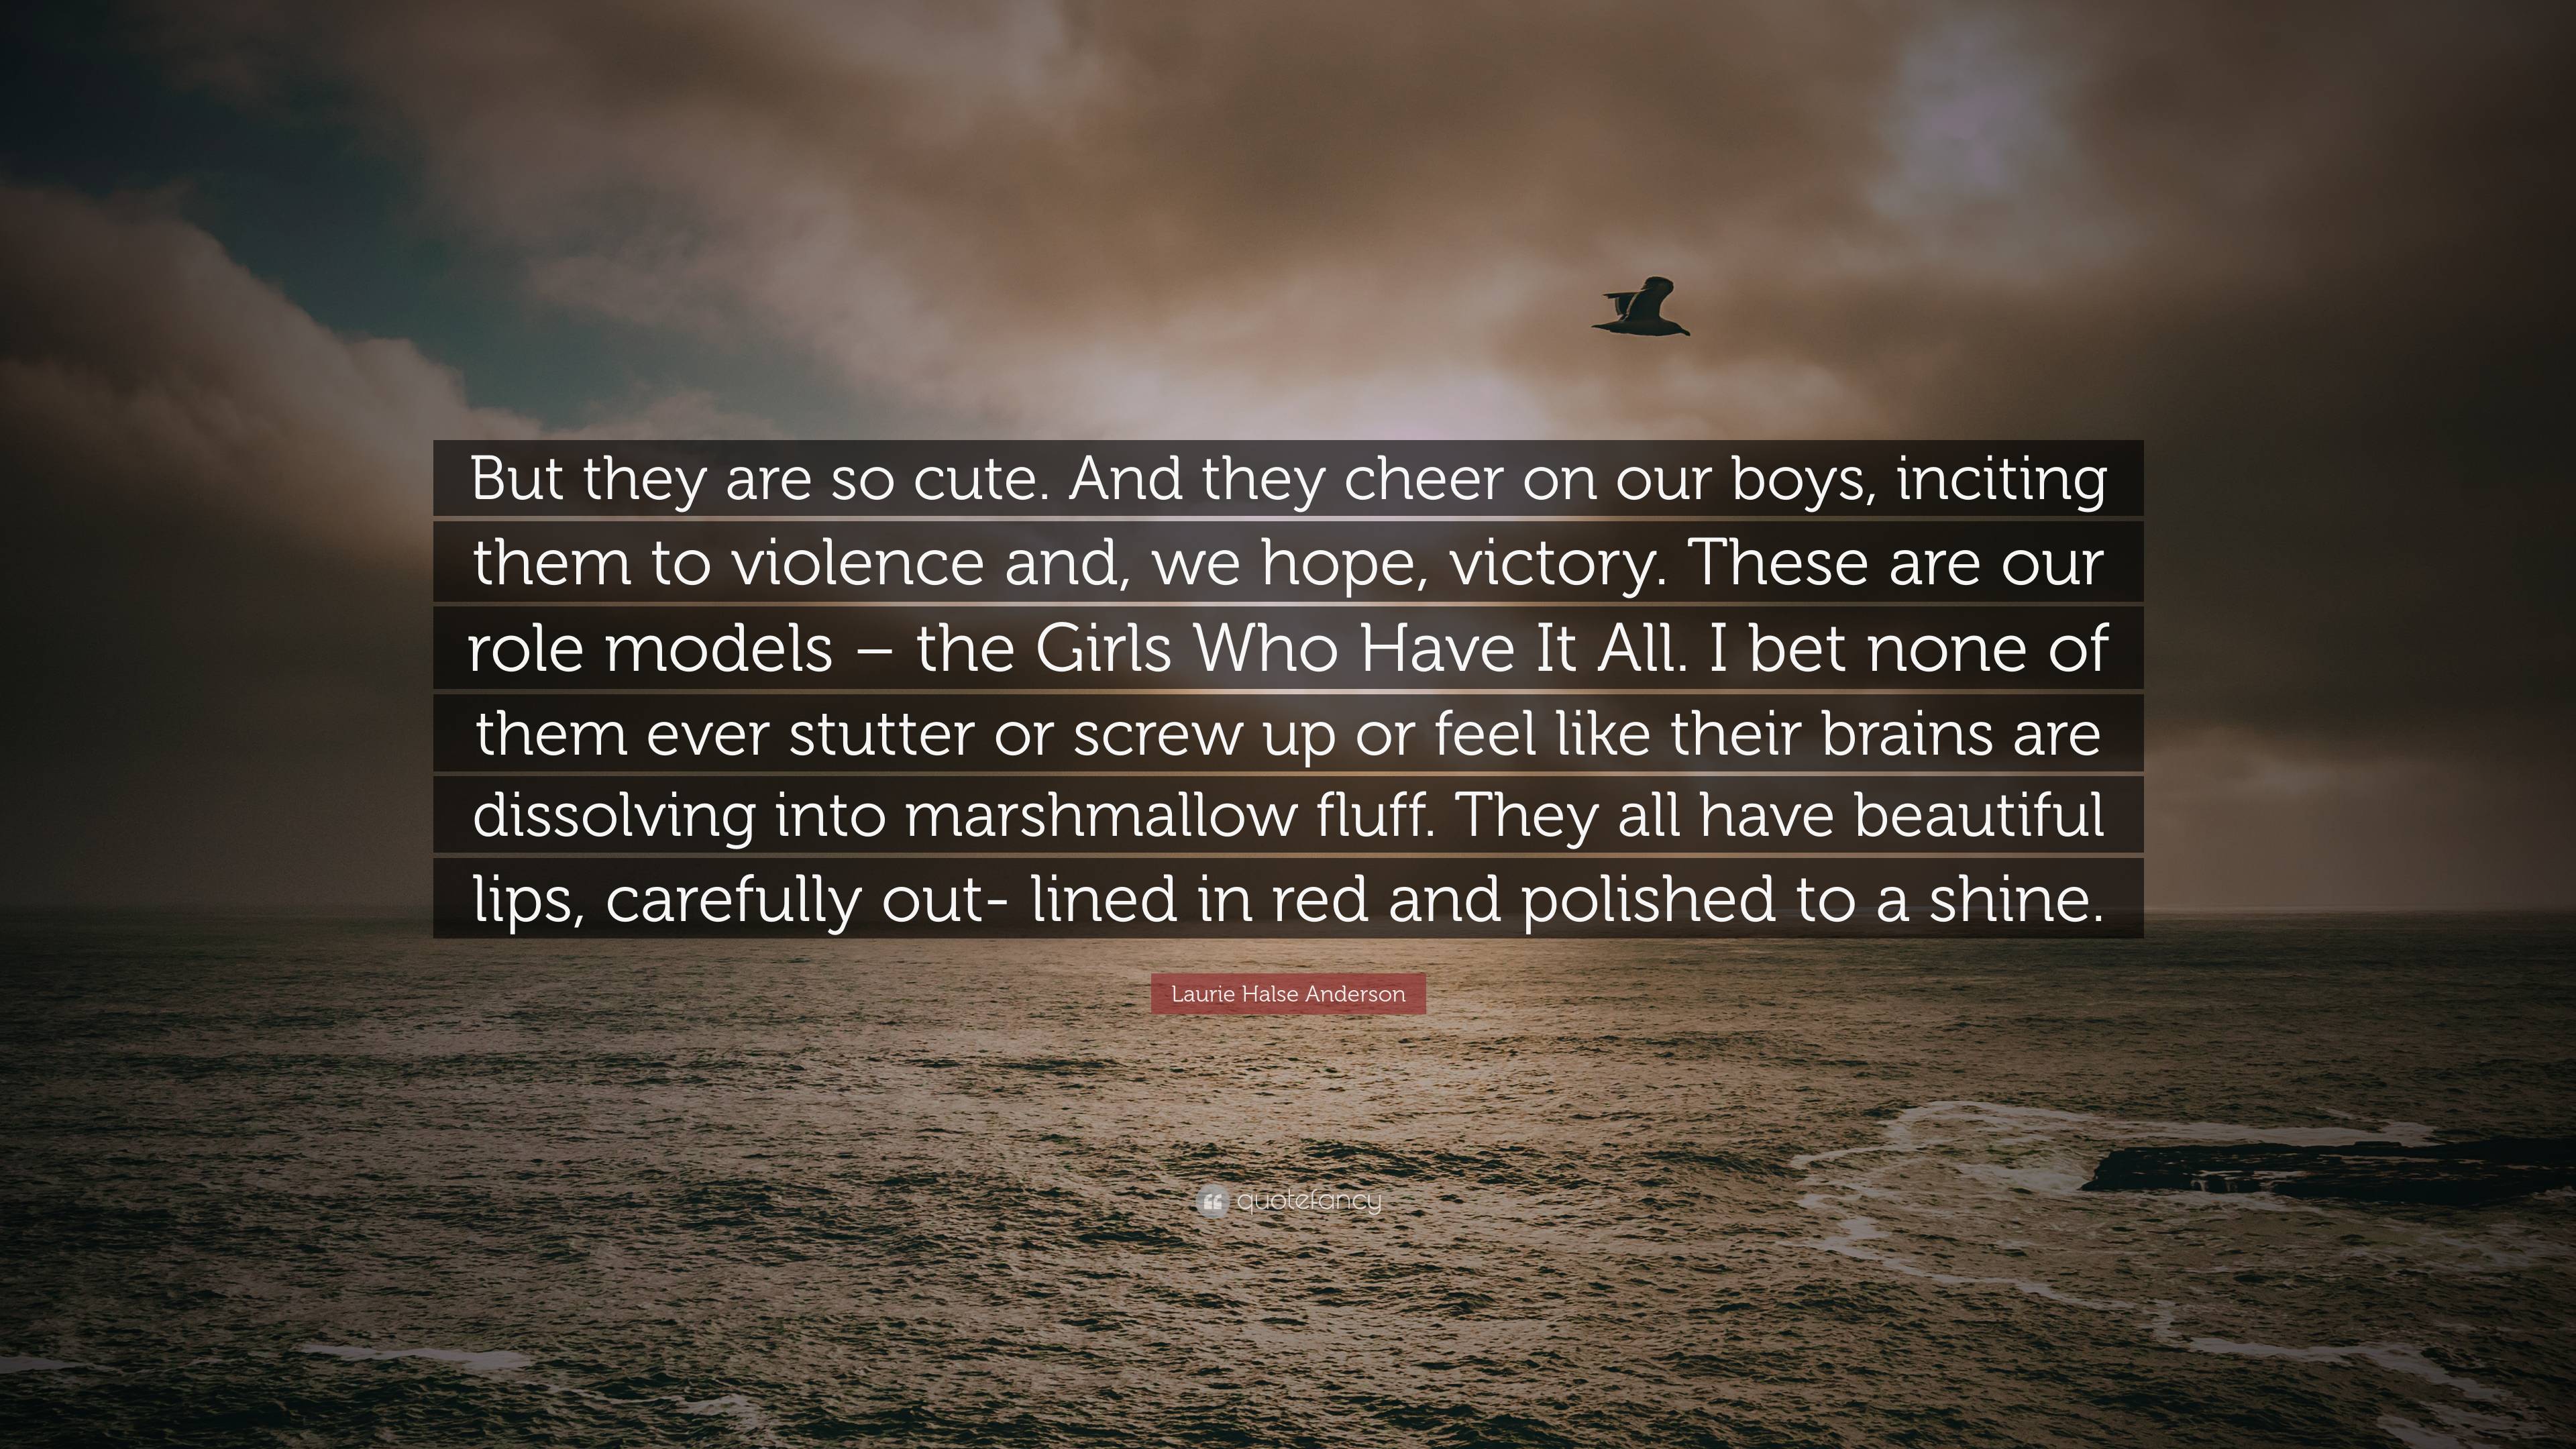 https://quotefancy.com/media/wallpaper/3840x2160/7608002-Laurie-Halse-Anderson-Quote-But-they-are-so-cute-And-they-cheer-on.jpg